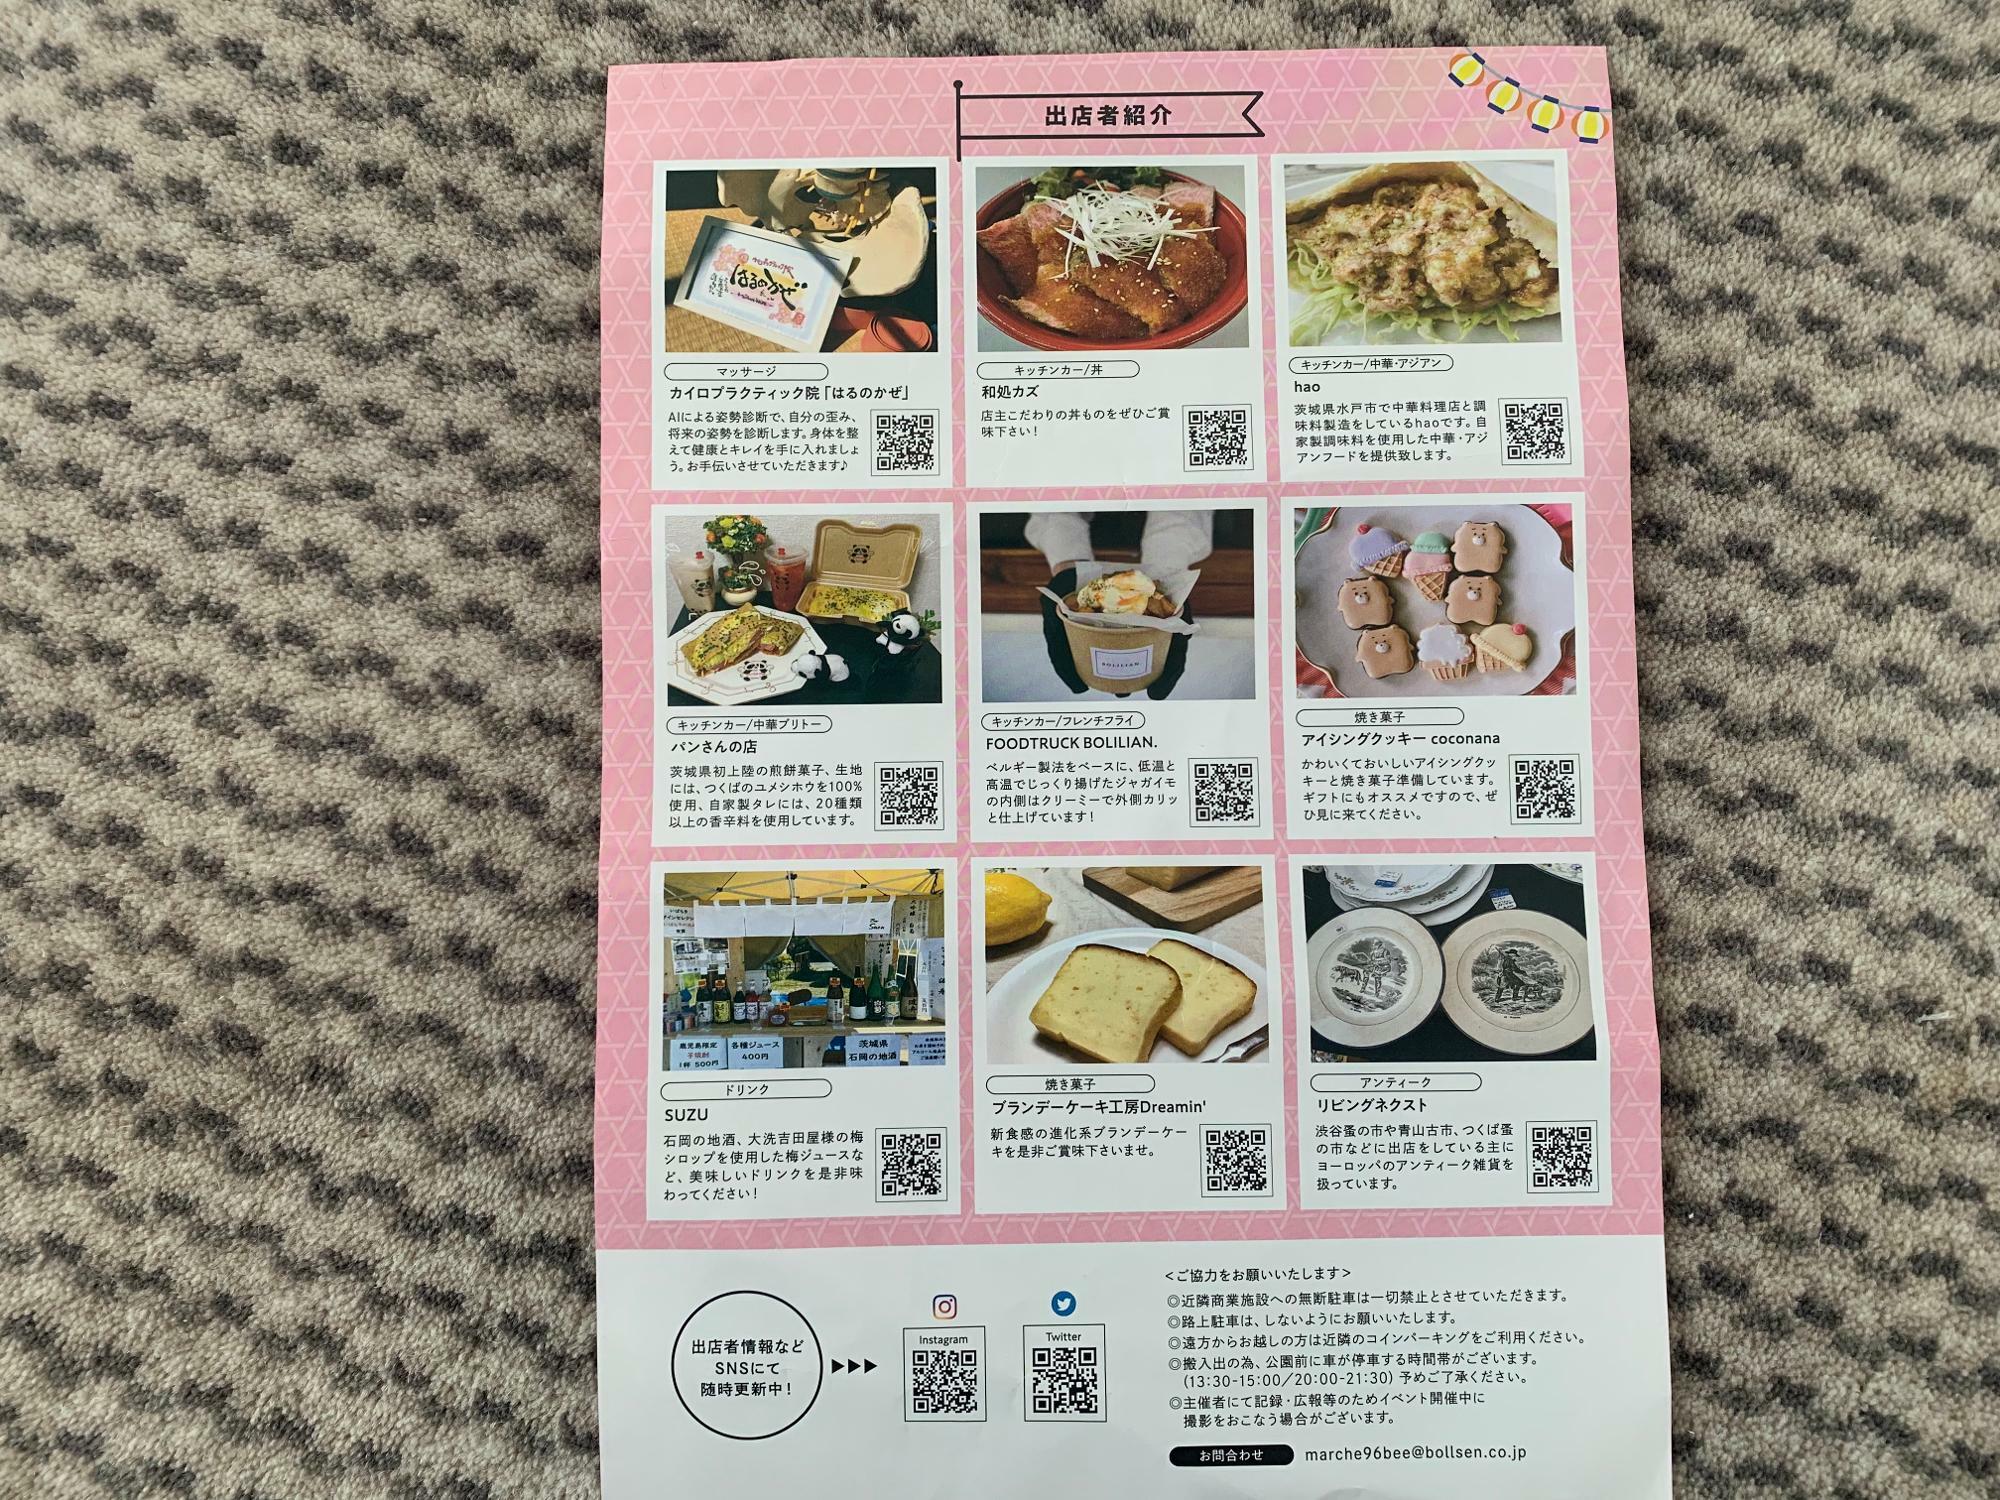 marché96bee 出店一覧